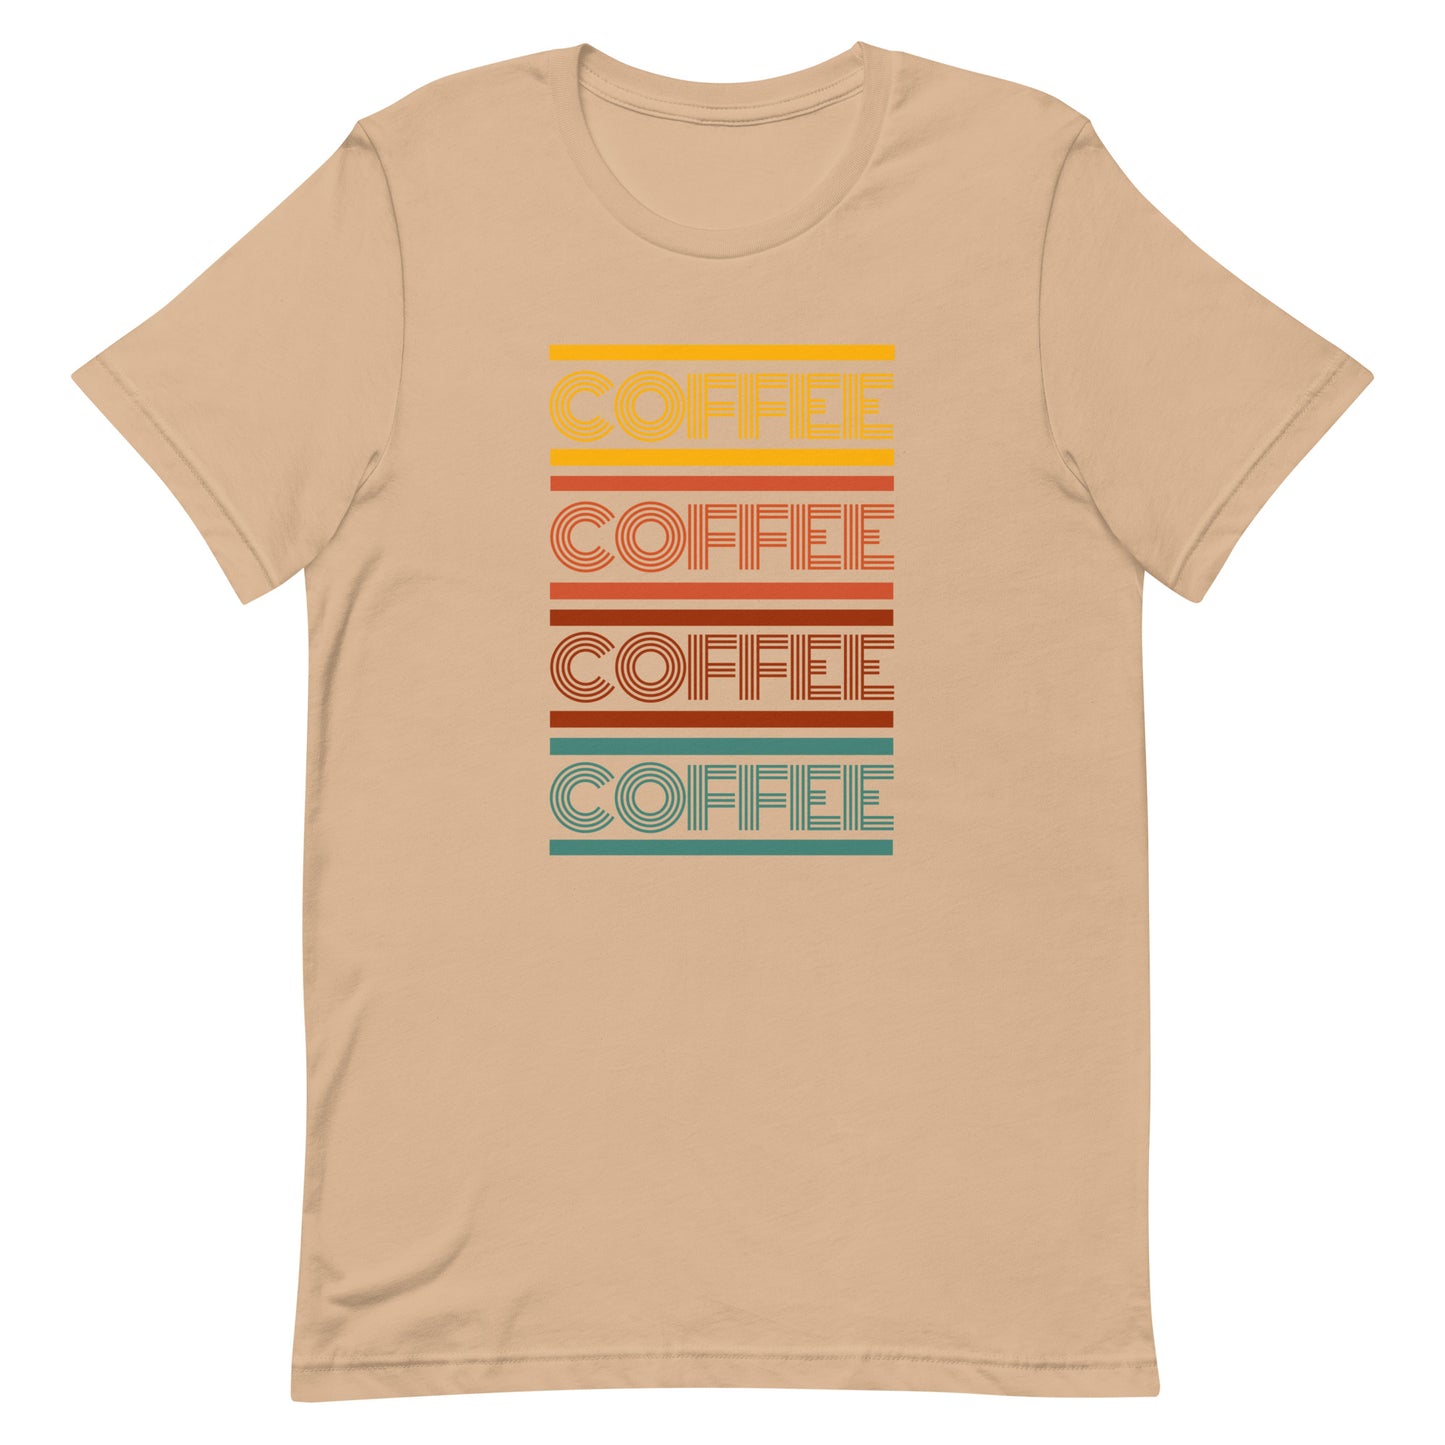 A tan coffee t-shirt that has the words coffee repeated in a retro inspired font.